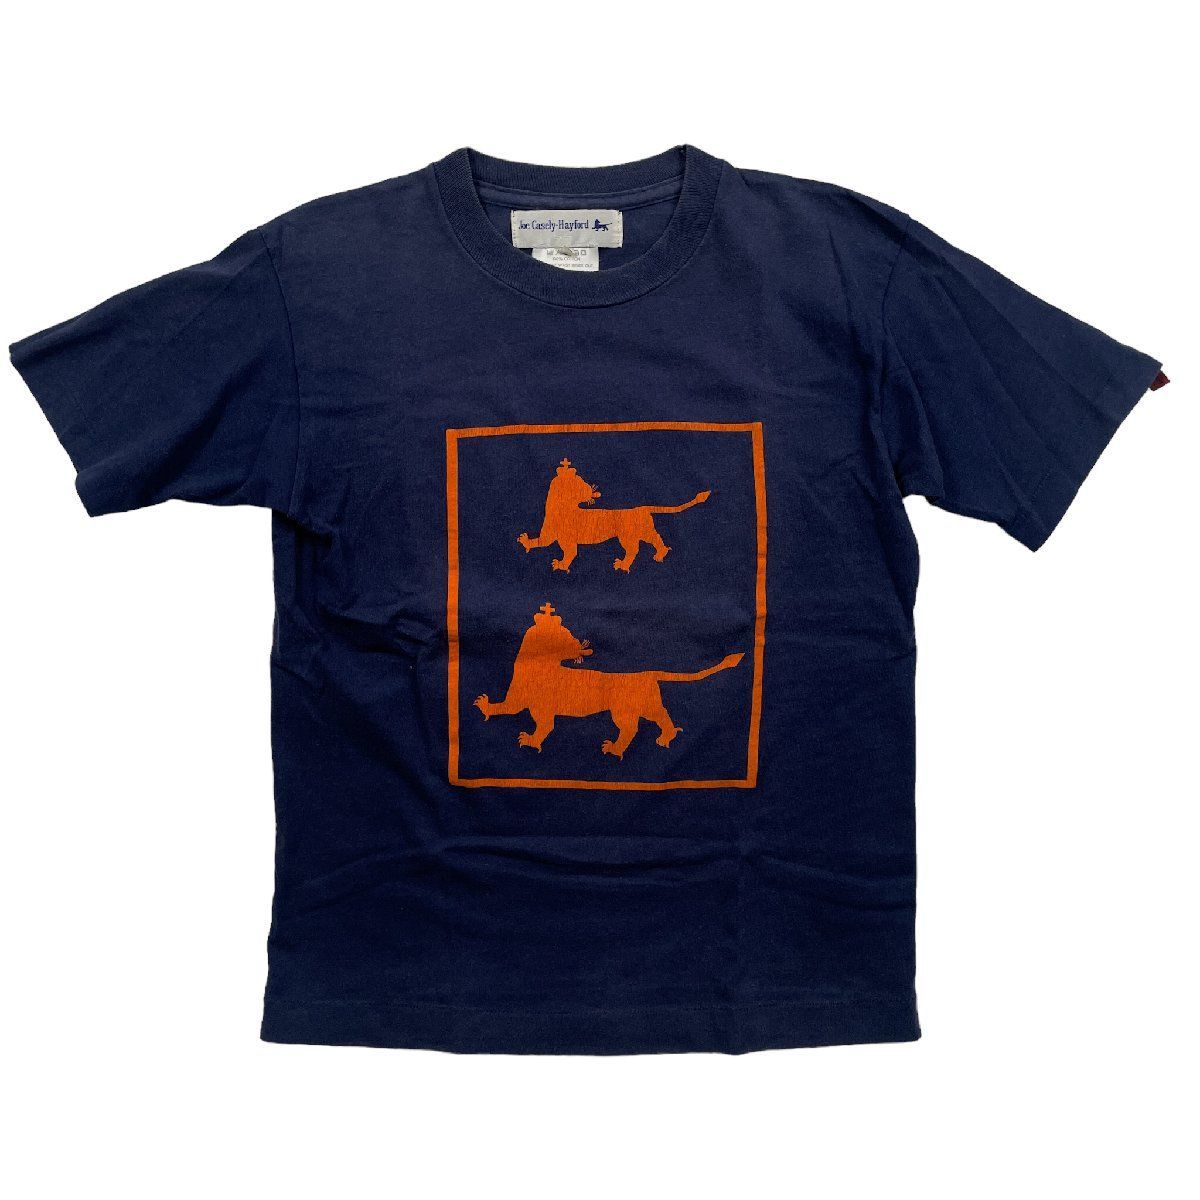 Casely-Hayford Tシャツ・カットソー メンズ